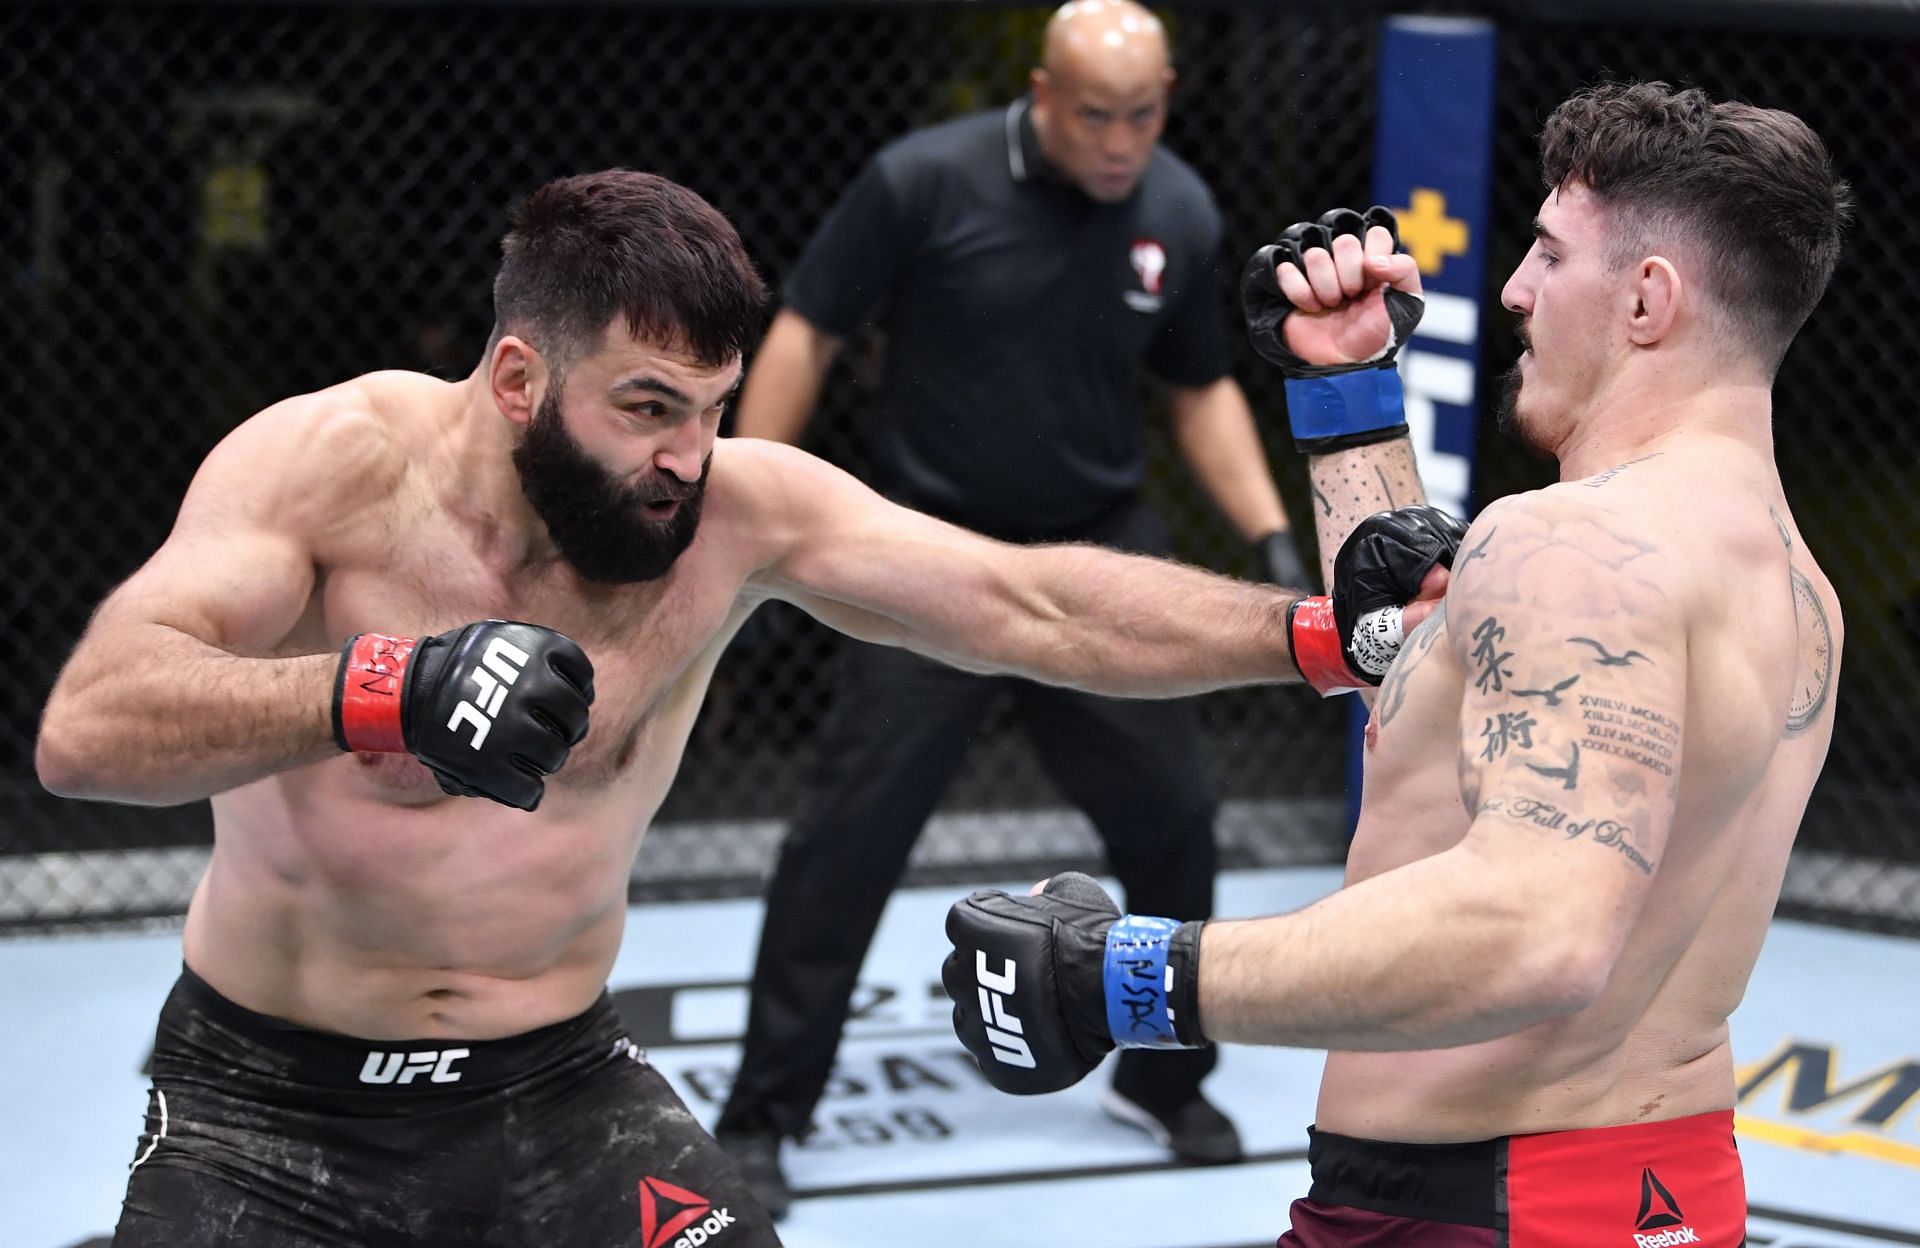 Andrei Arlovski has been competing at the top for 23 years